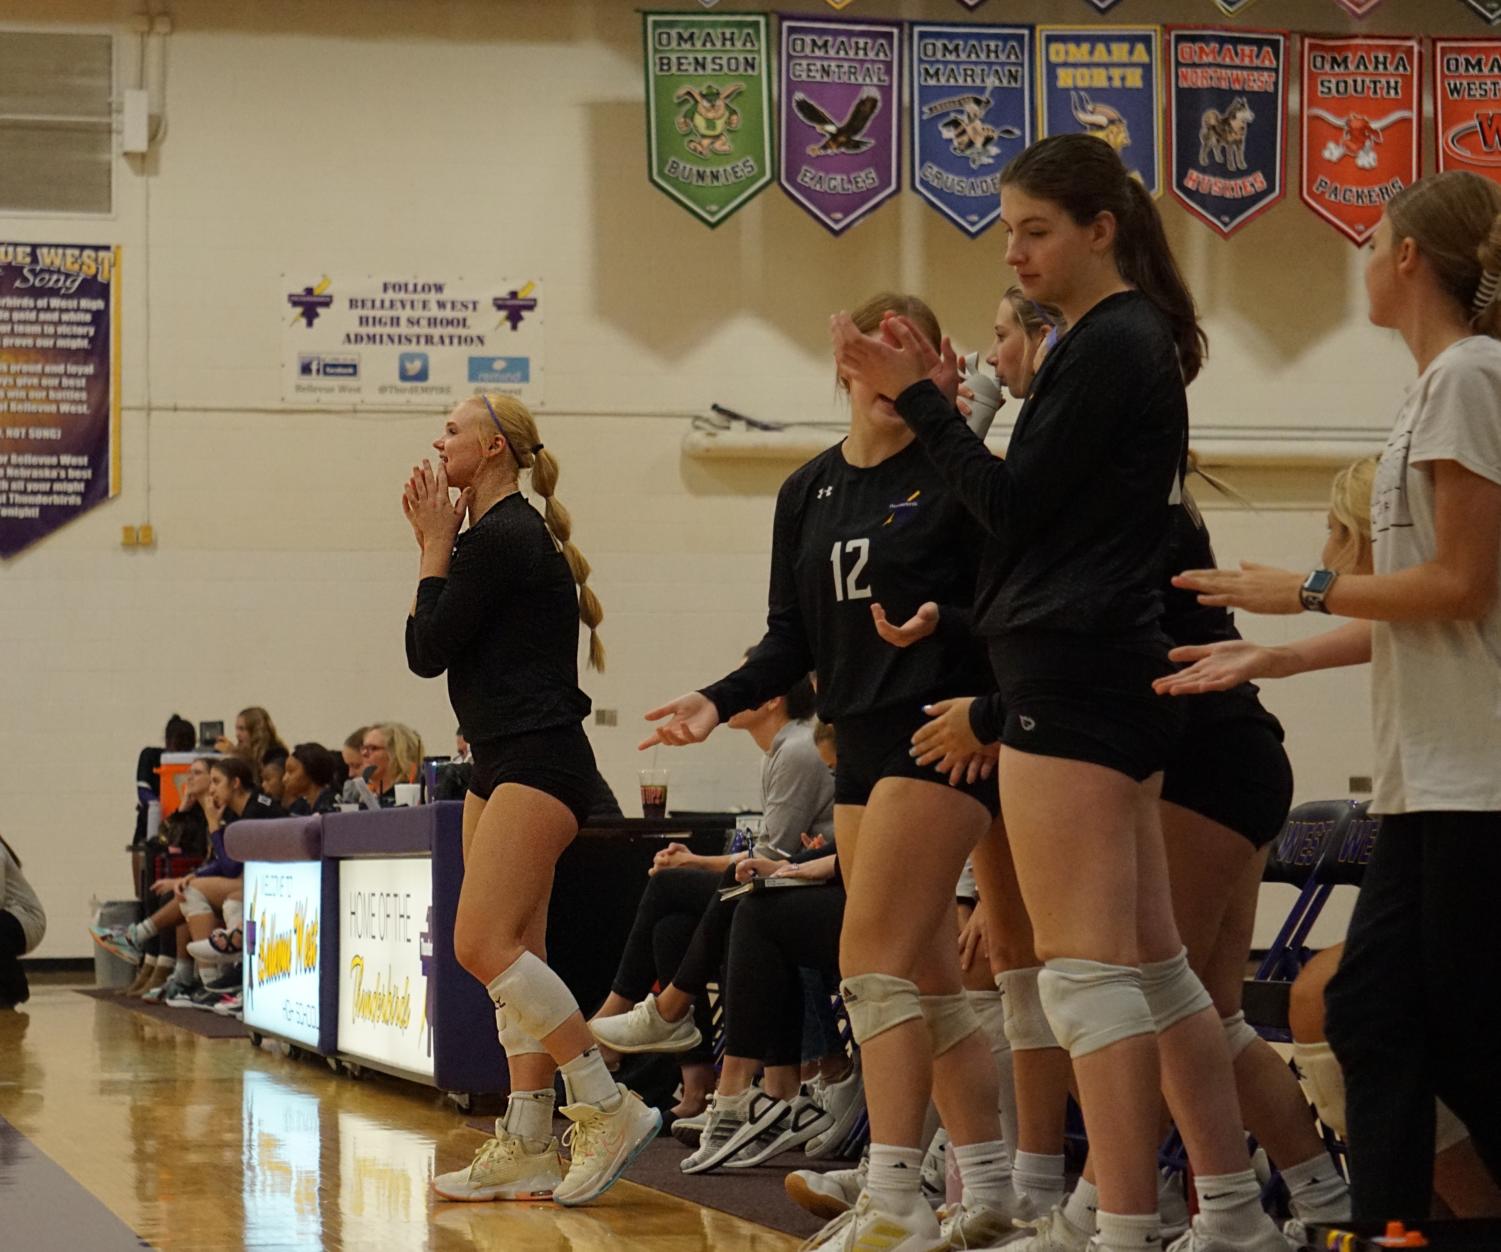 Sophomore Tessa Reitsma stands up off the bench to congratulate her team after gaining a point. 
